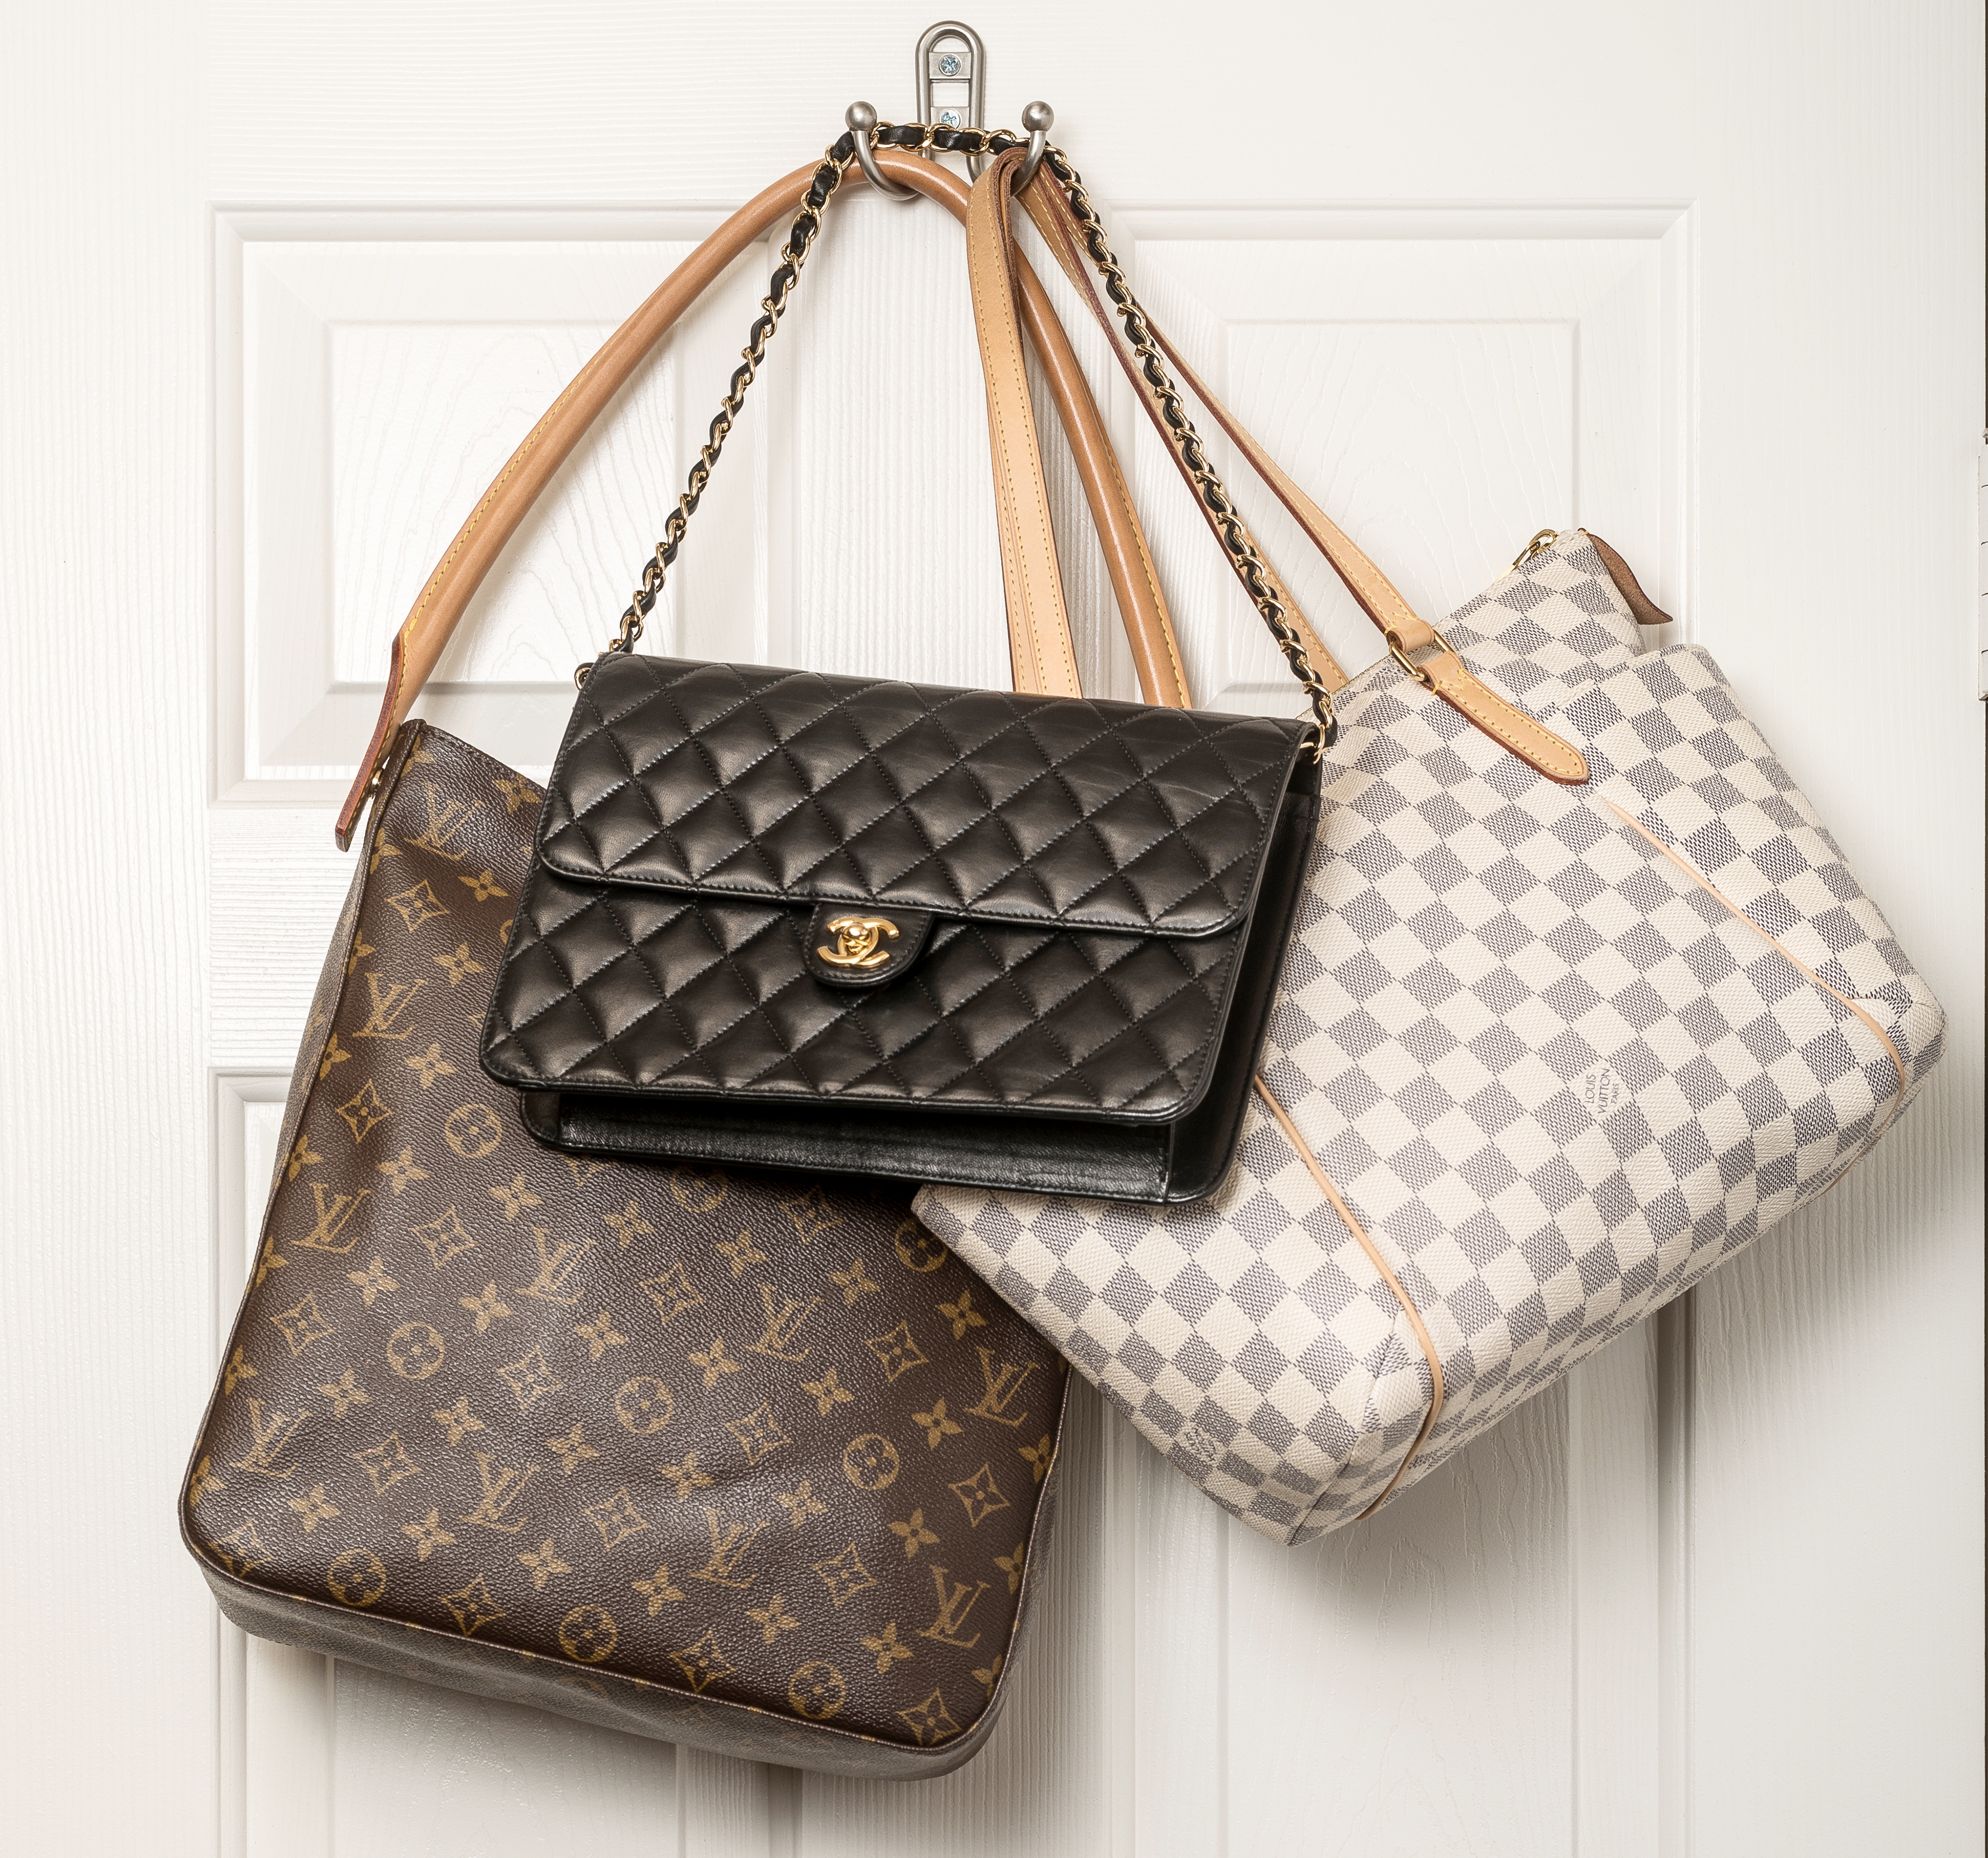 Fresno Coin Gallery Jewelry & Loan - We BUY your gently used handbags! We  take Coach, Chanel, Michael Kors, Louis Vuitton, Gucci, Kate Spade, and  more! Please visit us for your free